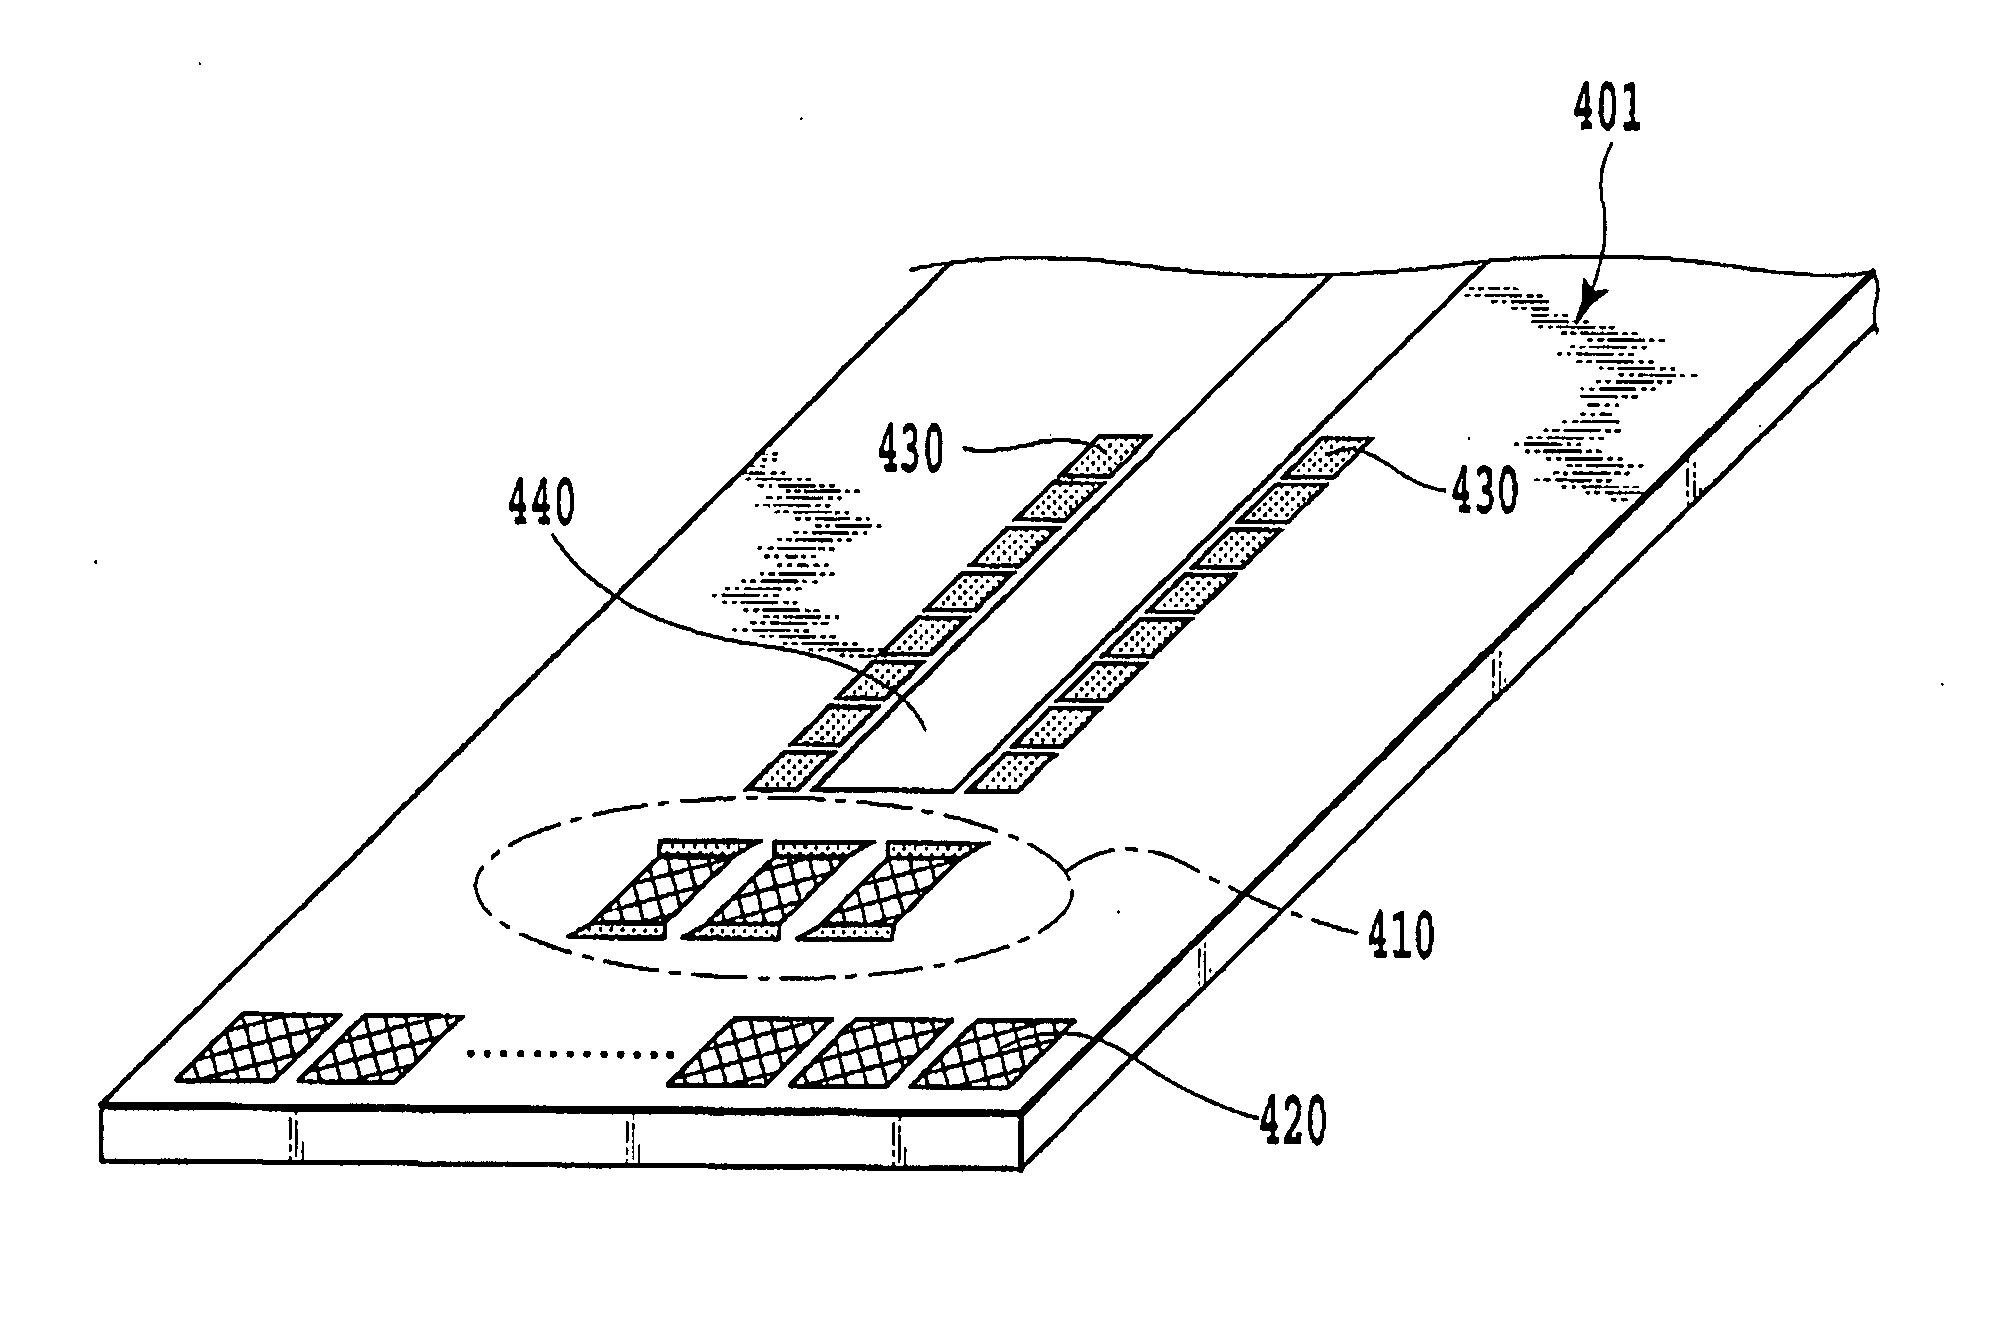 Substrate for ink jet printing head, ink jet printing head, ink jet printing apparatus, and method of blowing fuse element of ink jet printing head